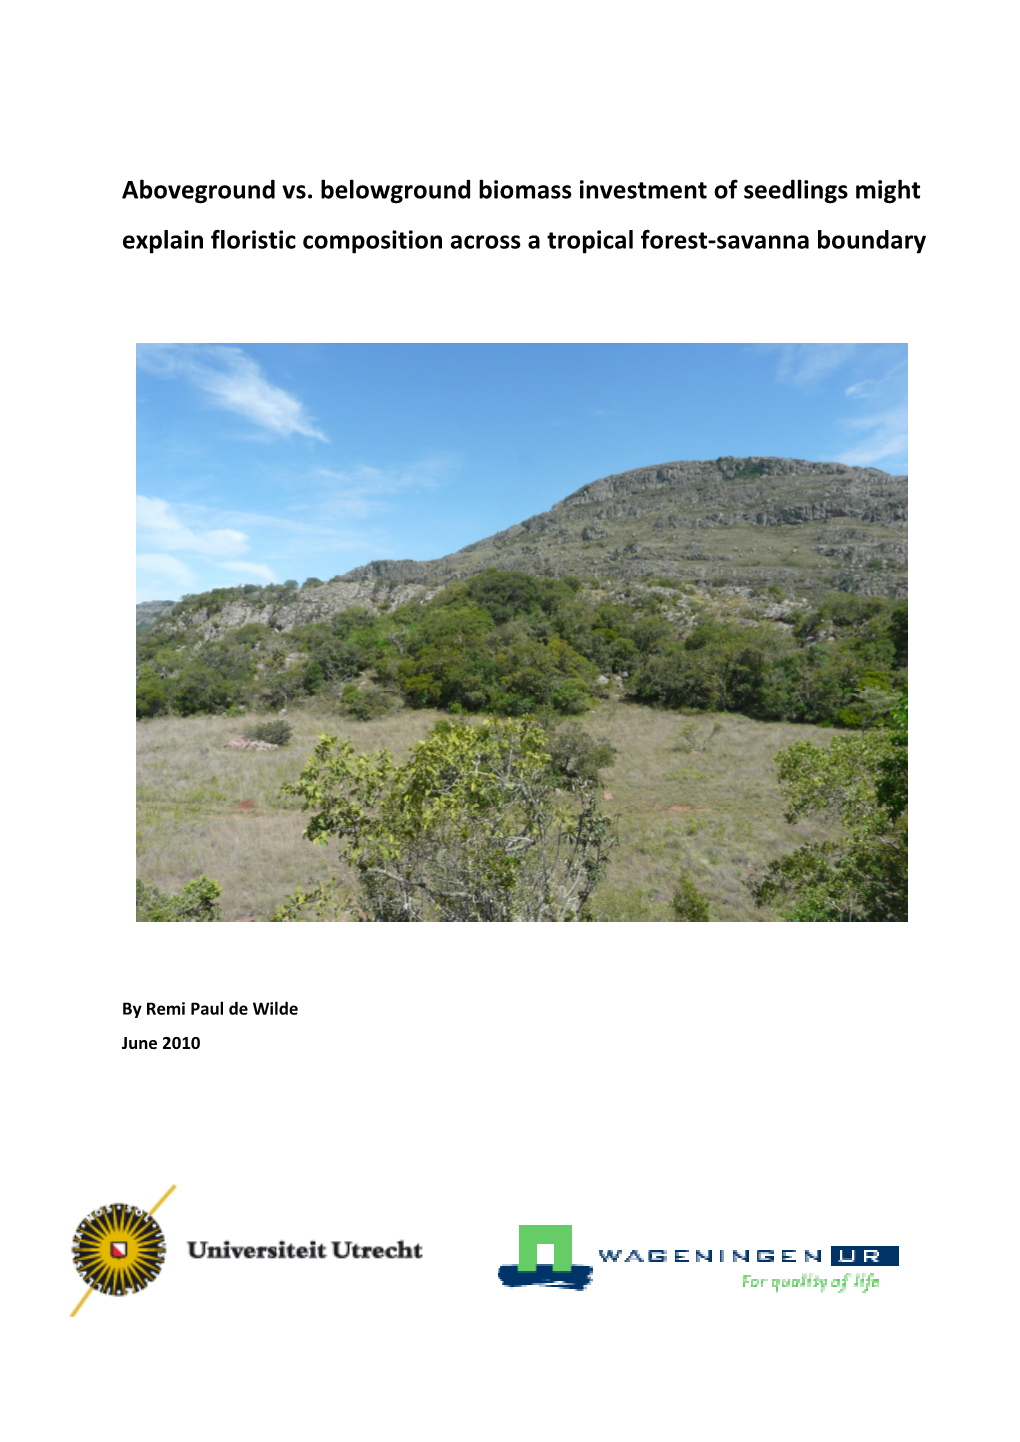 Aboveground Vs. Belowground Biomass Investment of Seedlings Might Explain Floristic Composition Across a Tropical Forest-Savanna Boundary